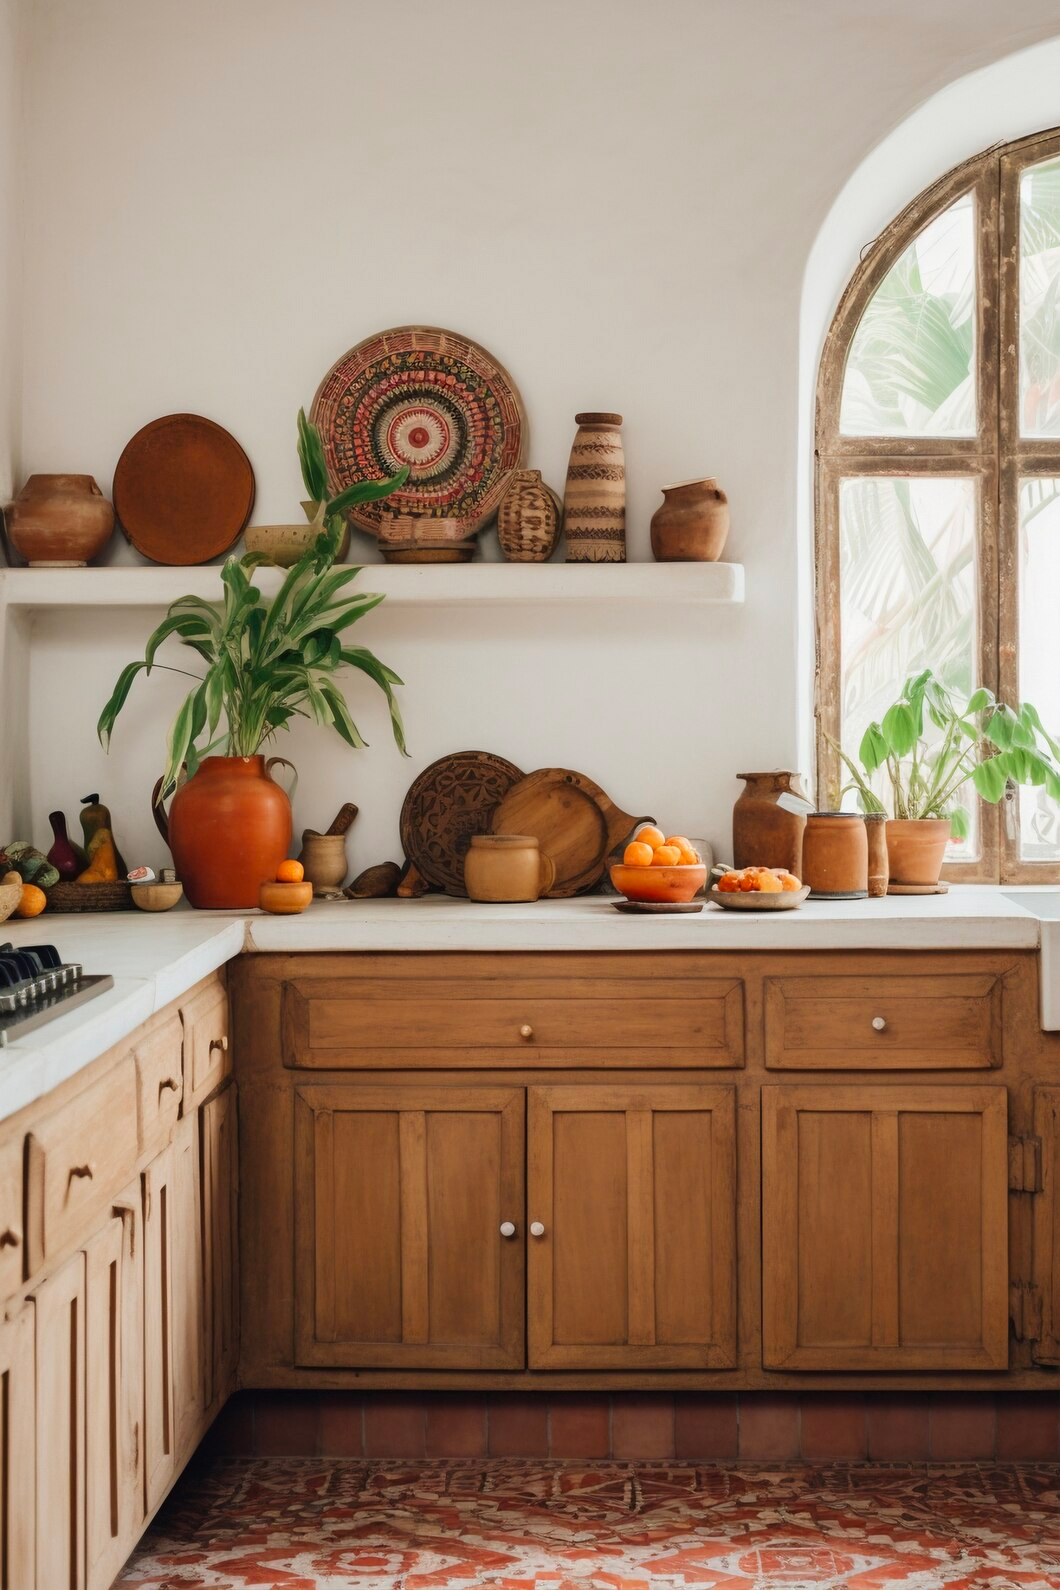 How to decorate a farmhouse kitchen wall?